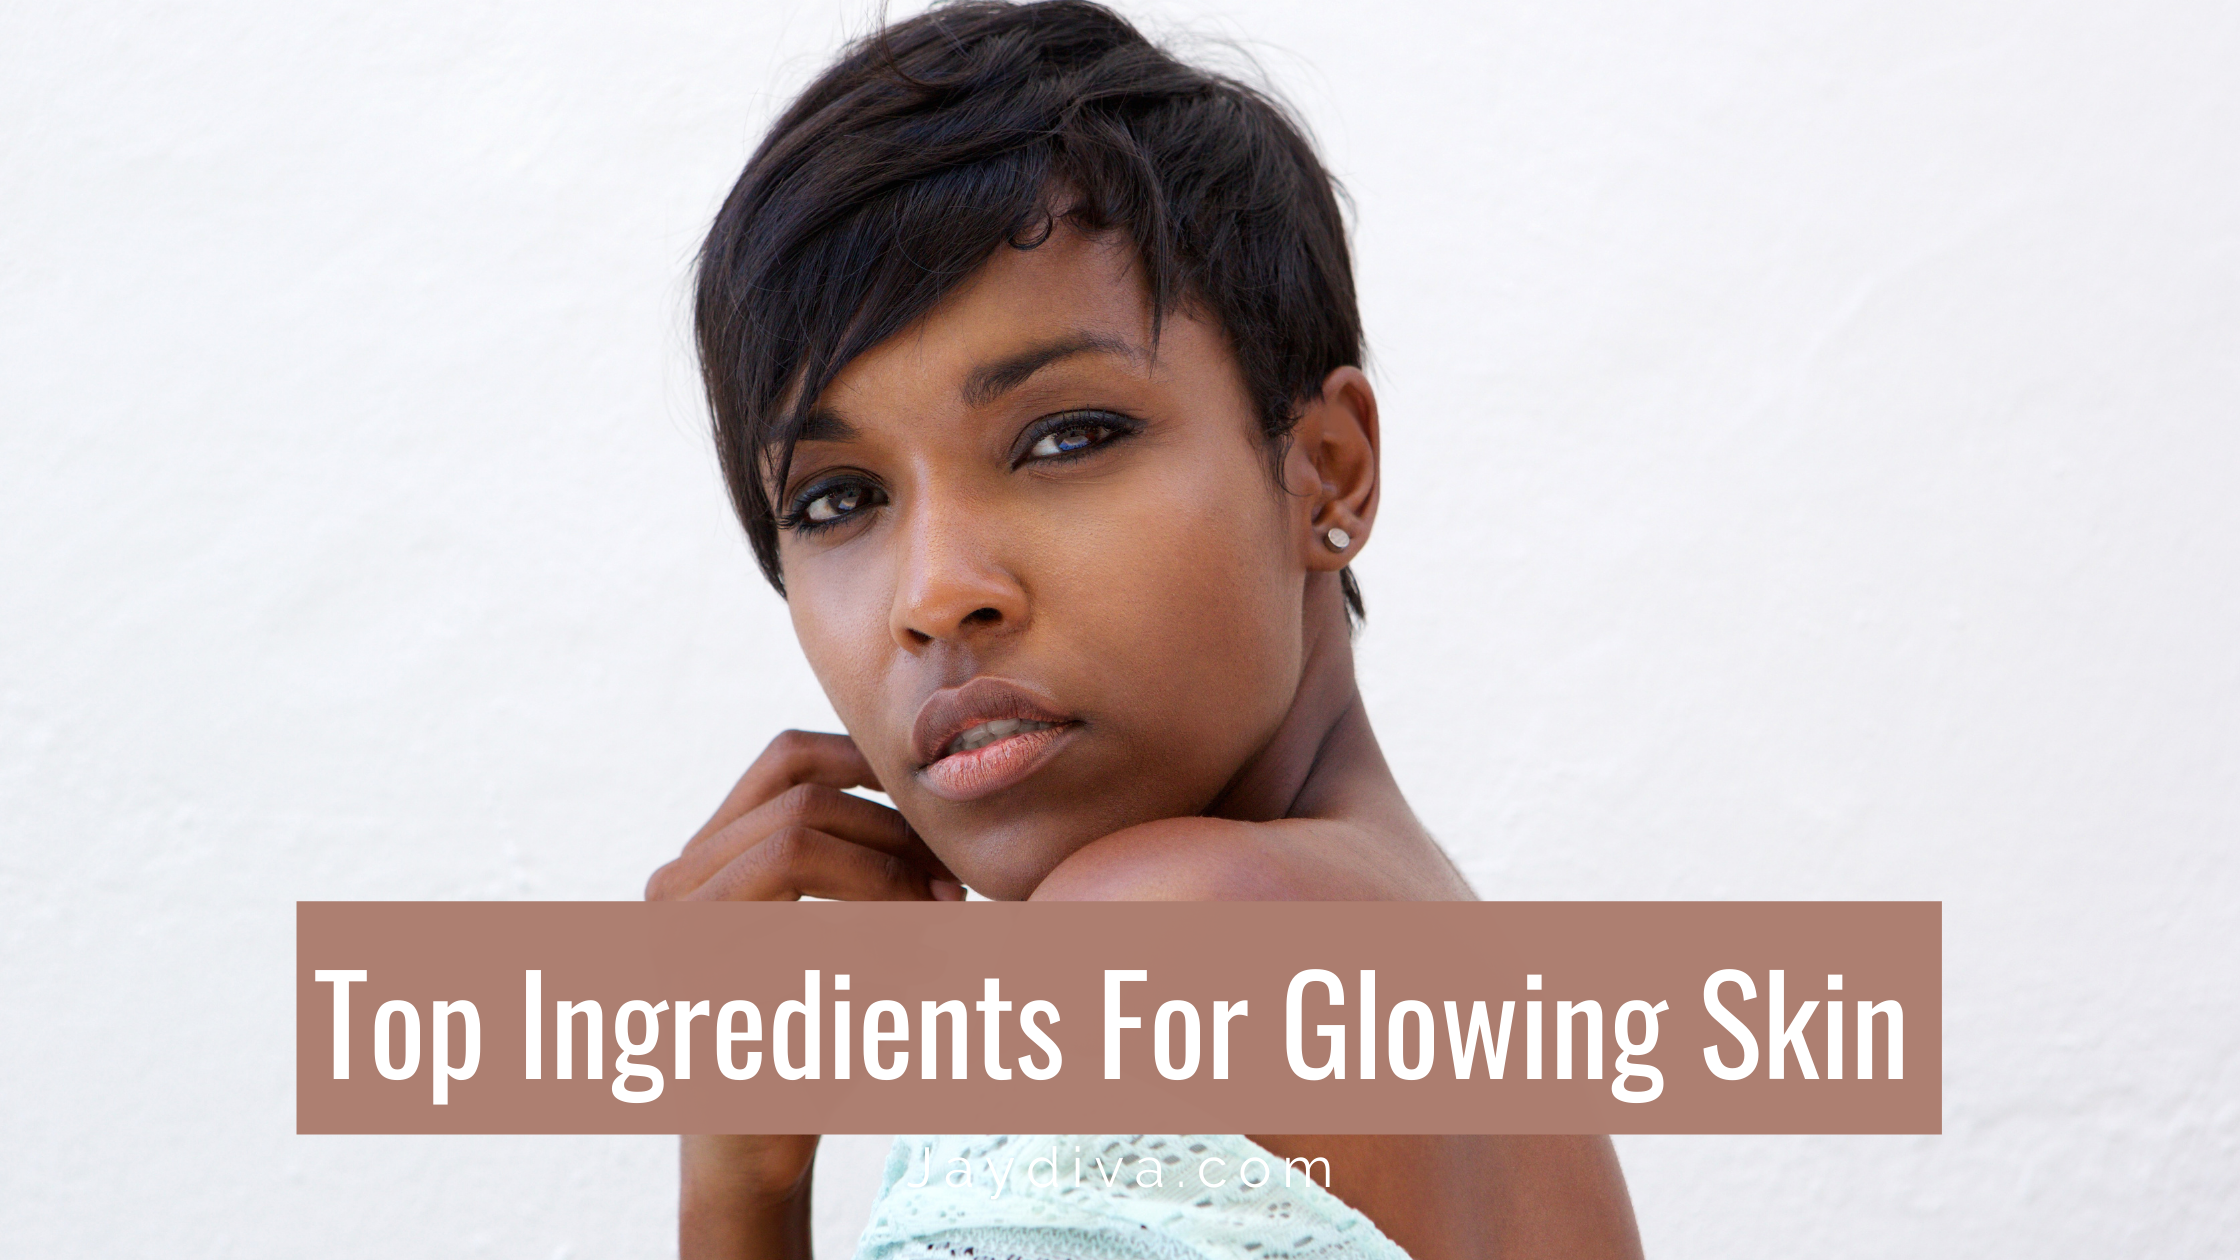 The Only 3 Skincare Ingredients You Need For Glowing Skin